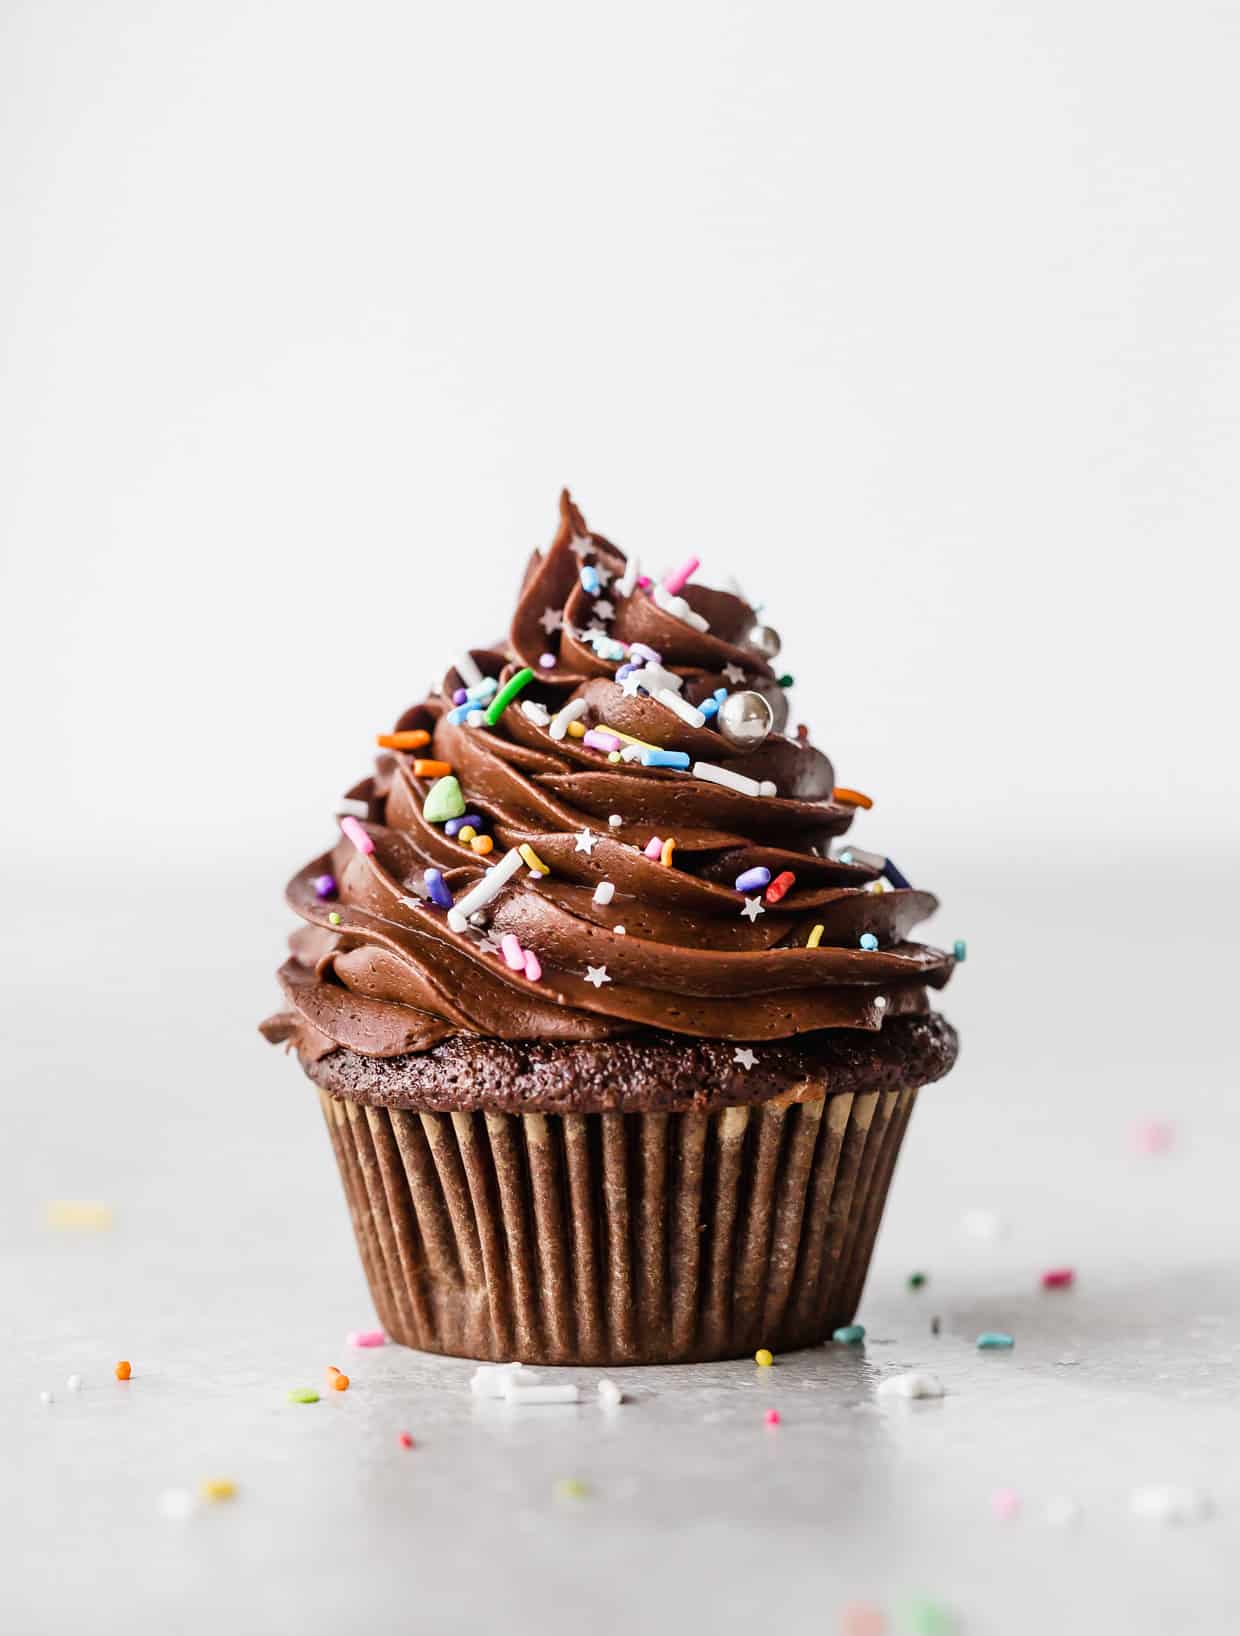 A single chocolate cupcake topped with a swirl of chocolate frosting and colorful sprinkles.